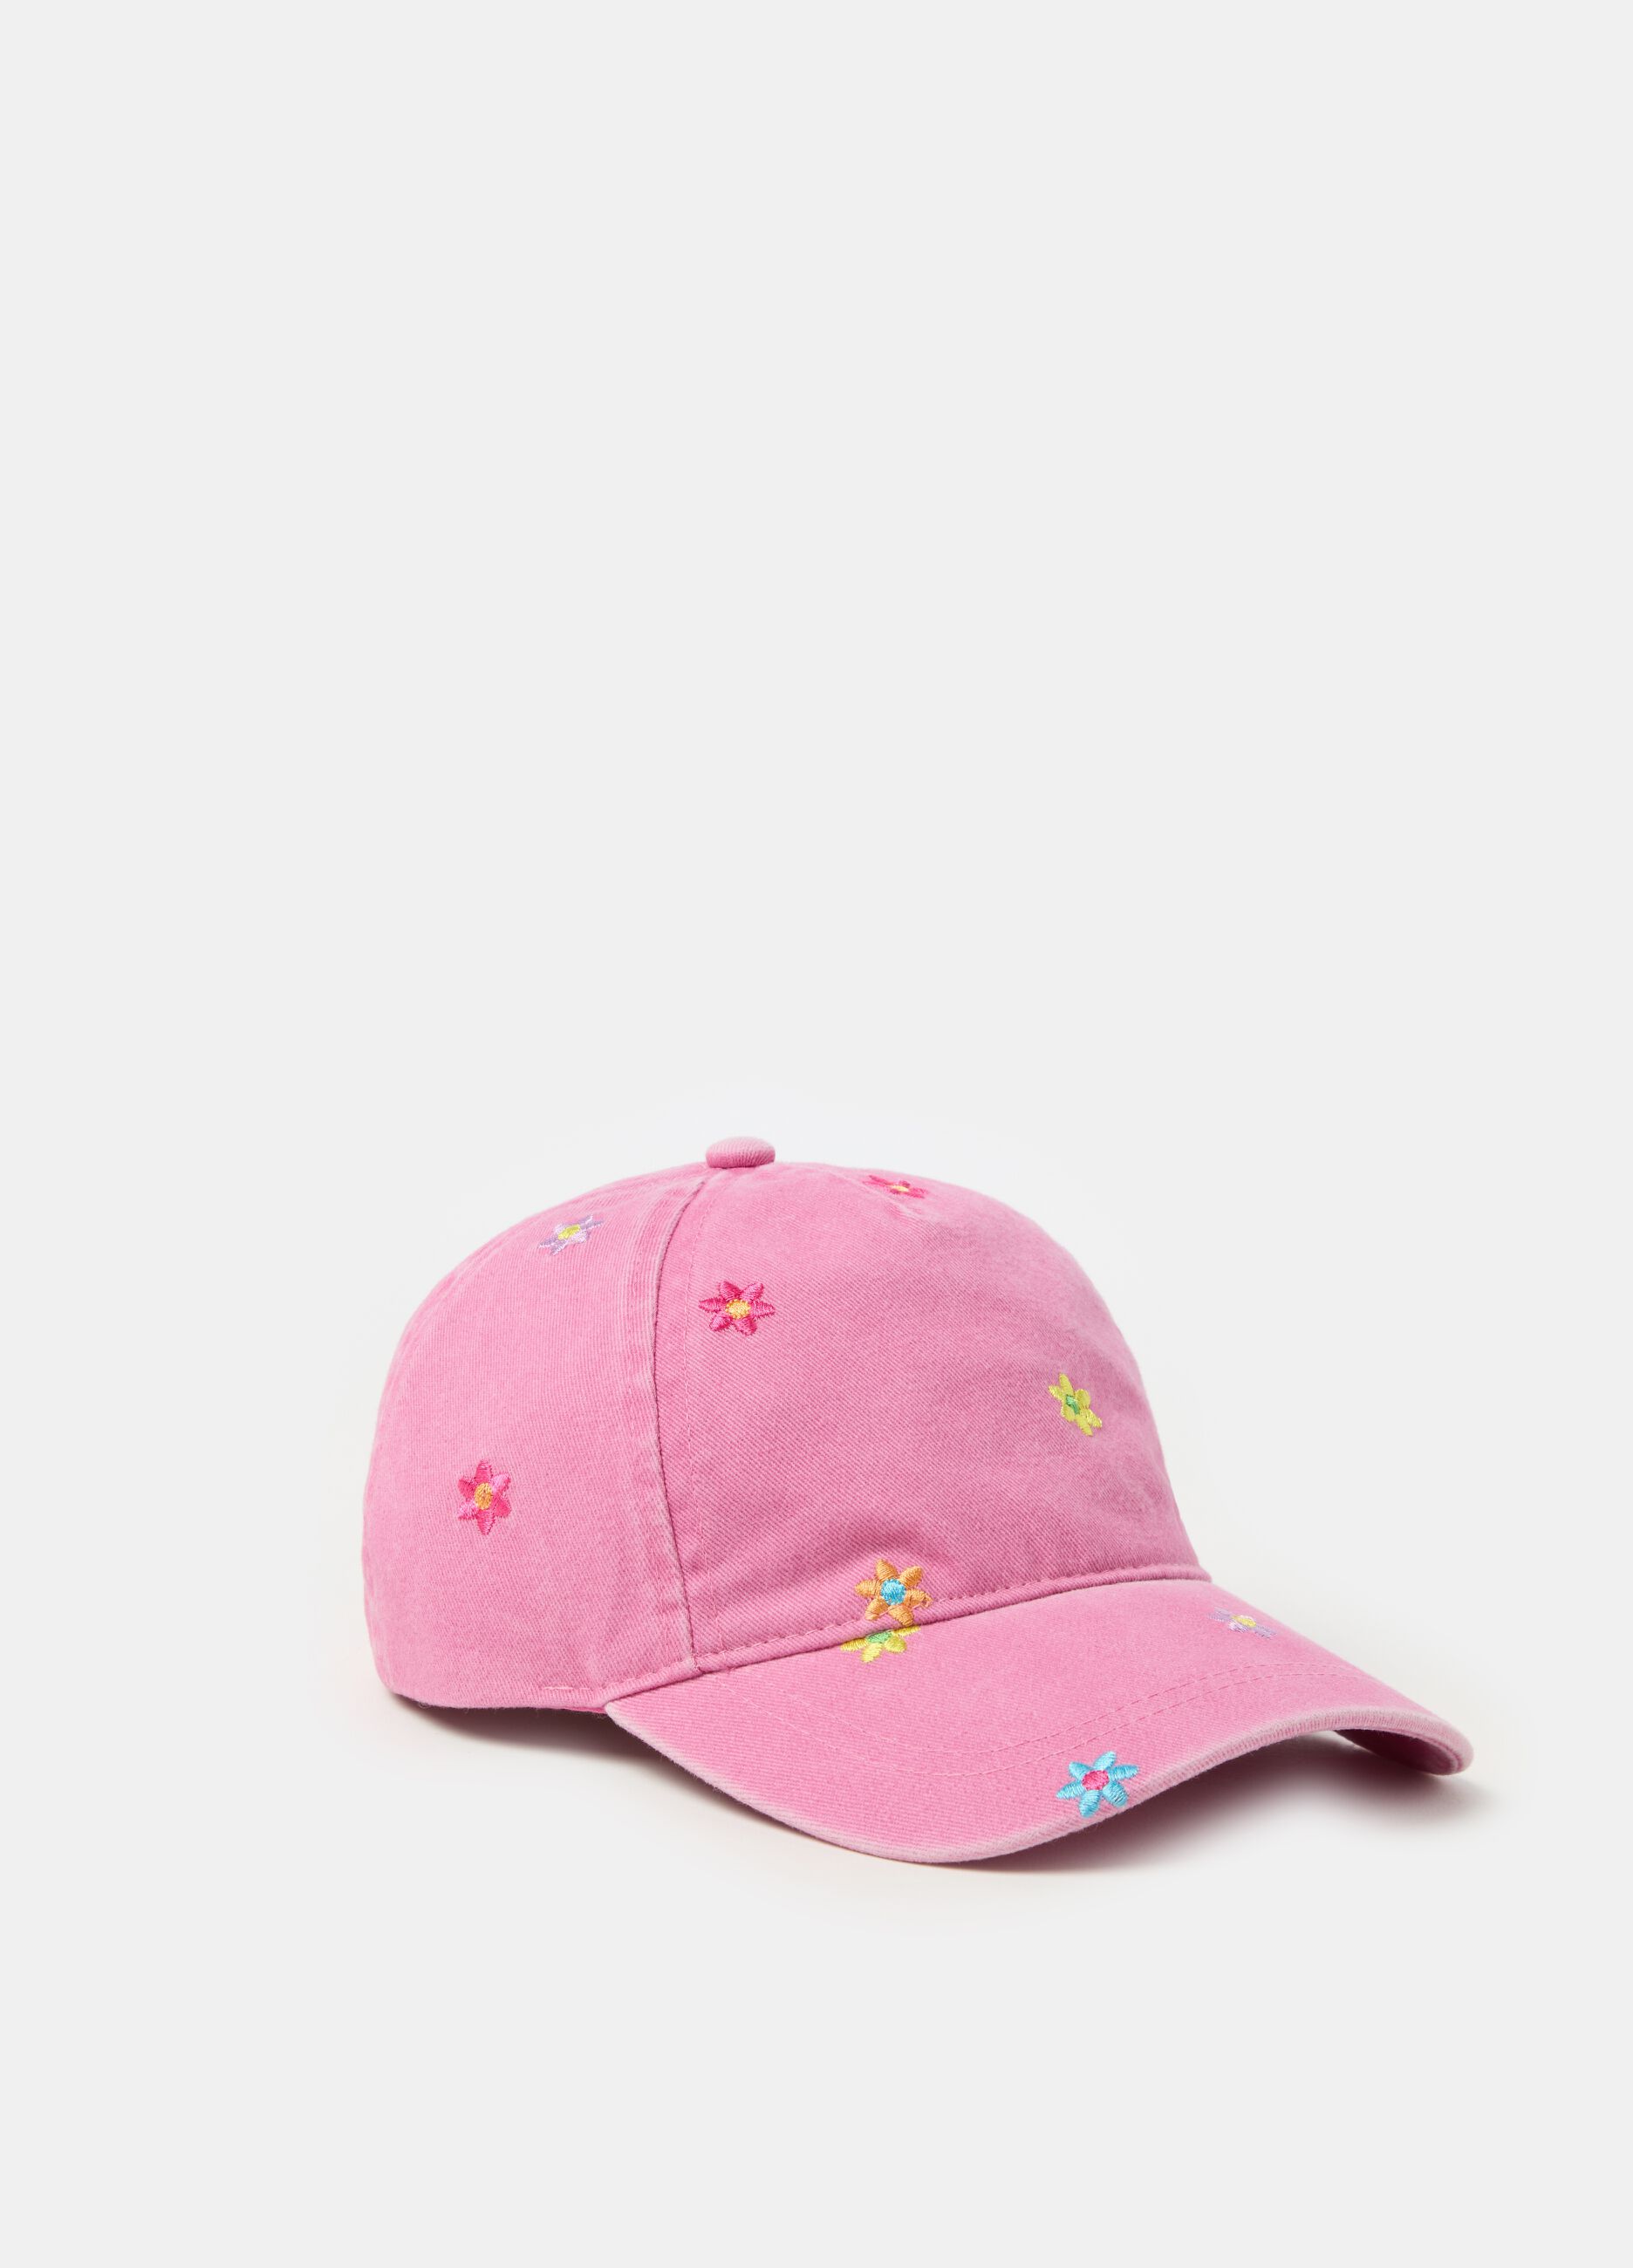 Denim baseball cap with embroidery